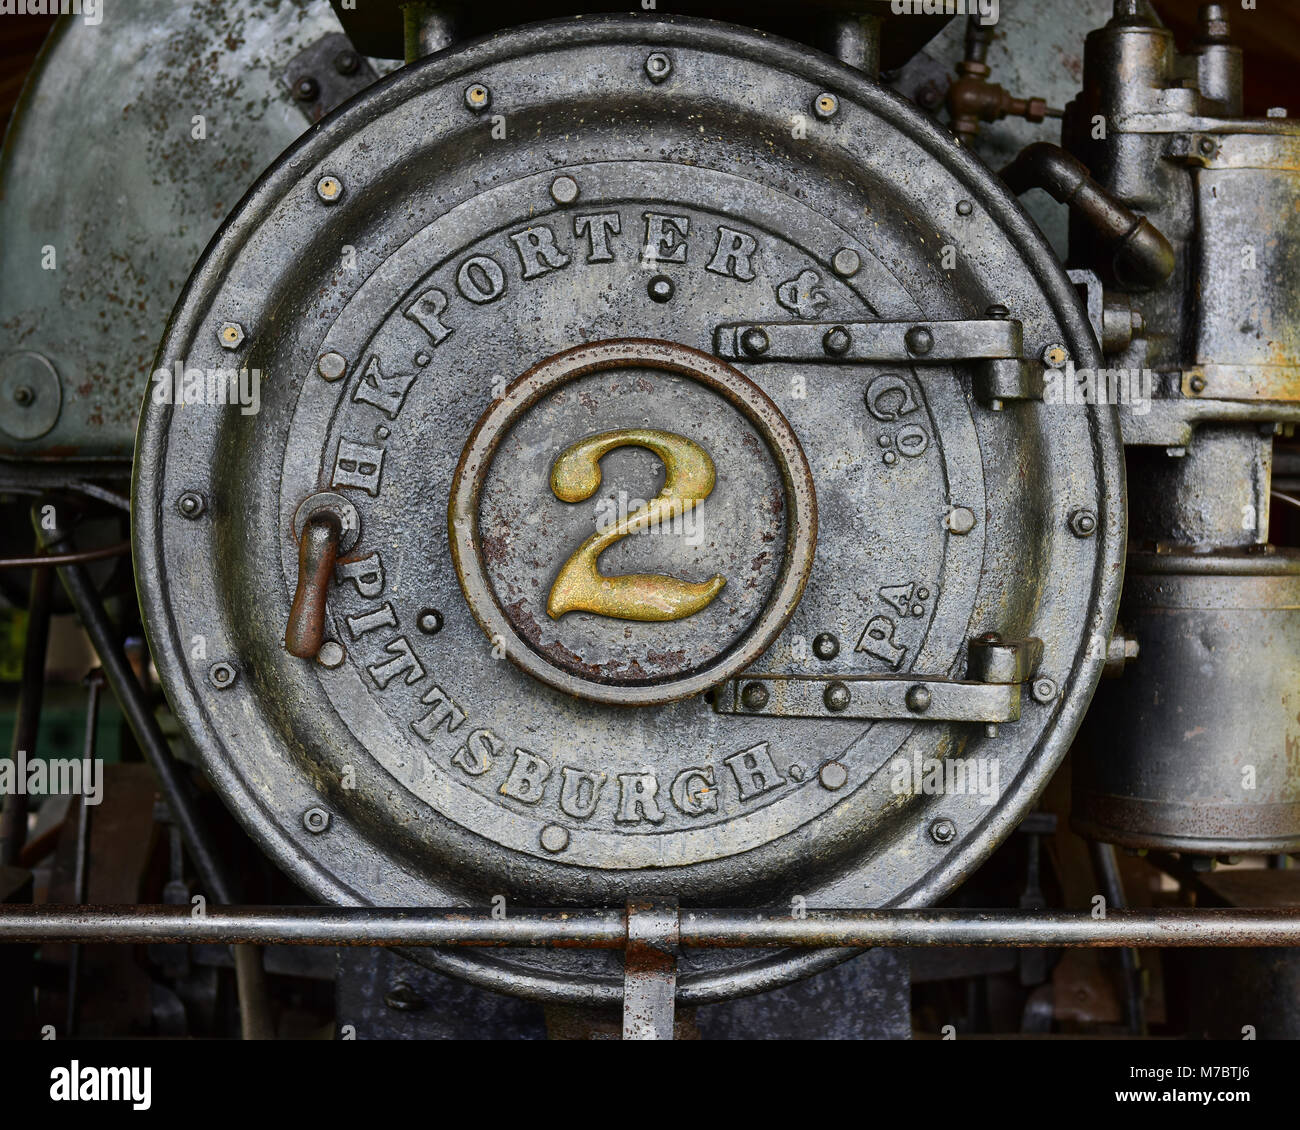 Details of the front end of H K Porter & Co. steam engine #2 on display at the the Adirondack Museum in Blue Mountain Lake, NY USA Stock Photo